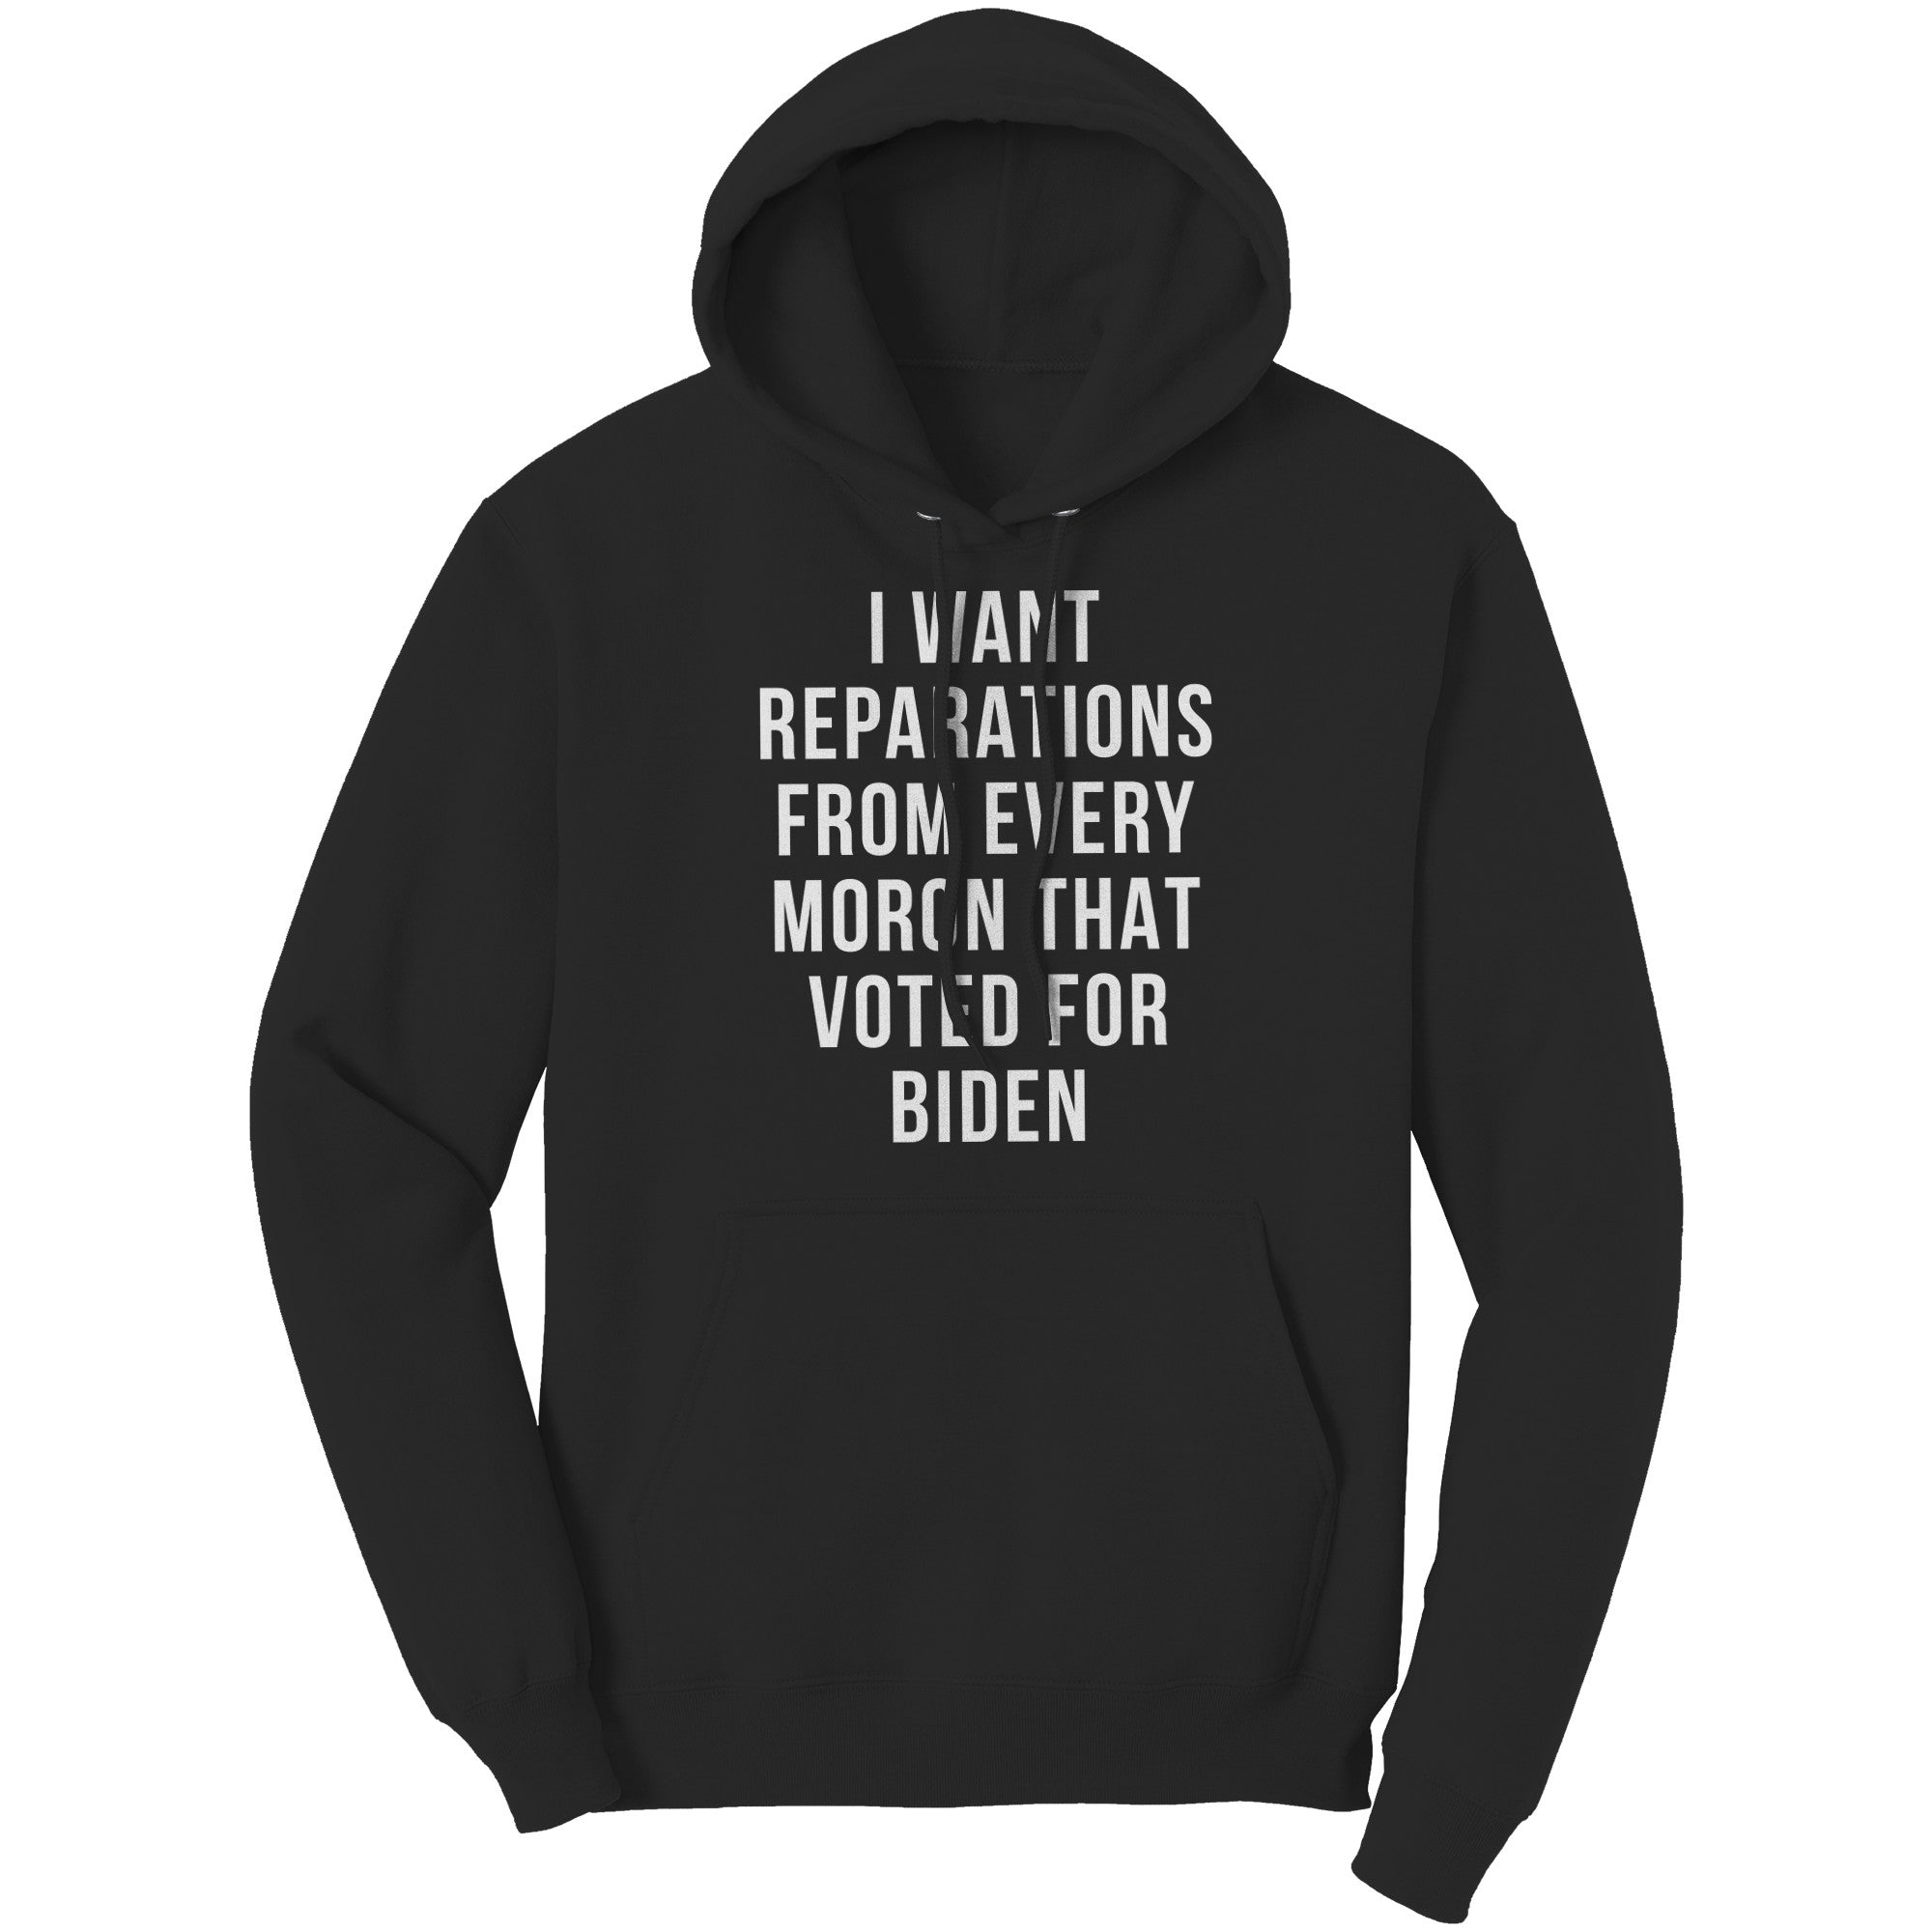 I Want Reparations For Every Moron That Voted For Biden (Ladies) -Apparel | Drunk America 